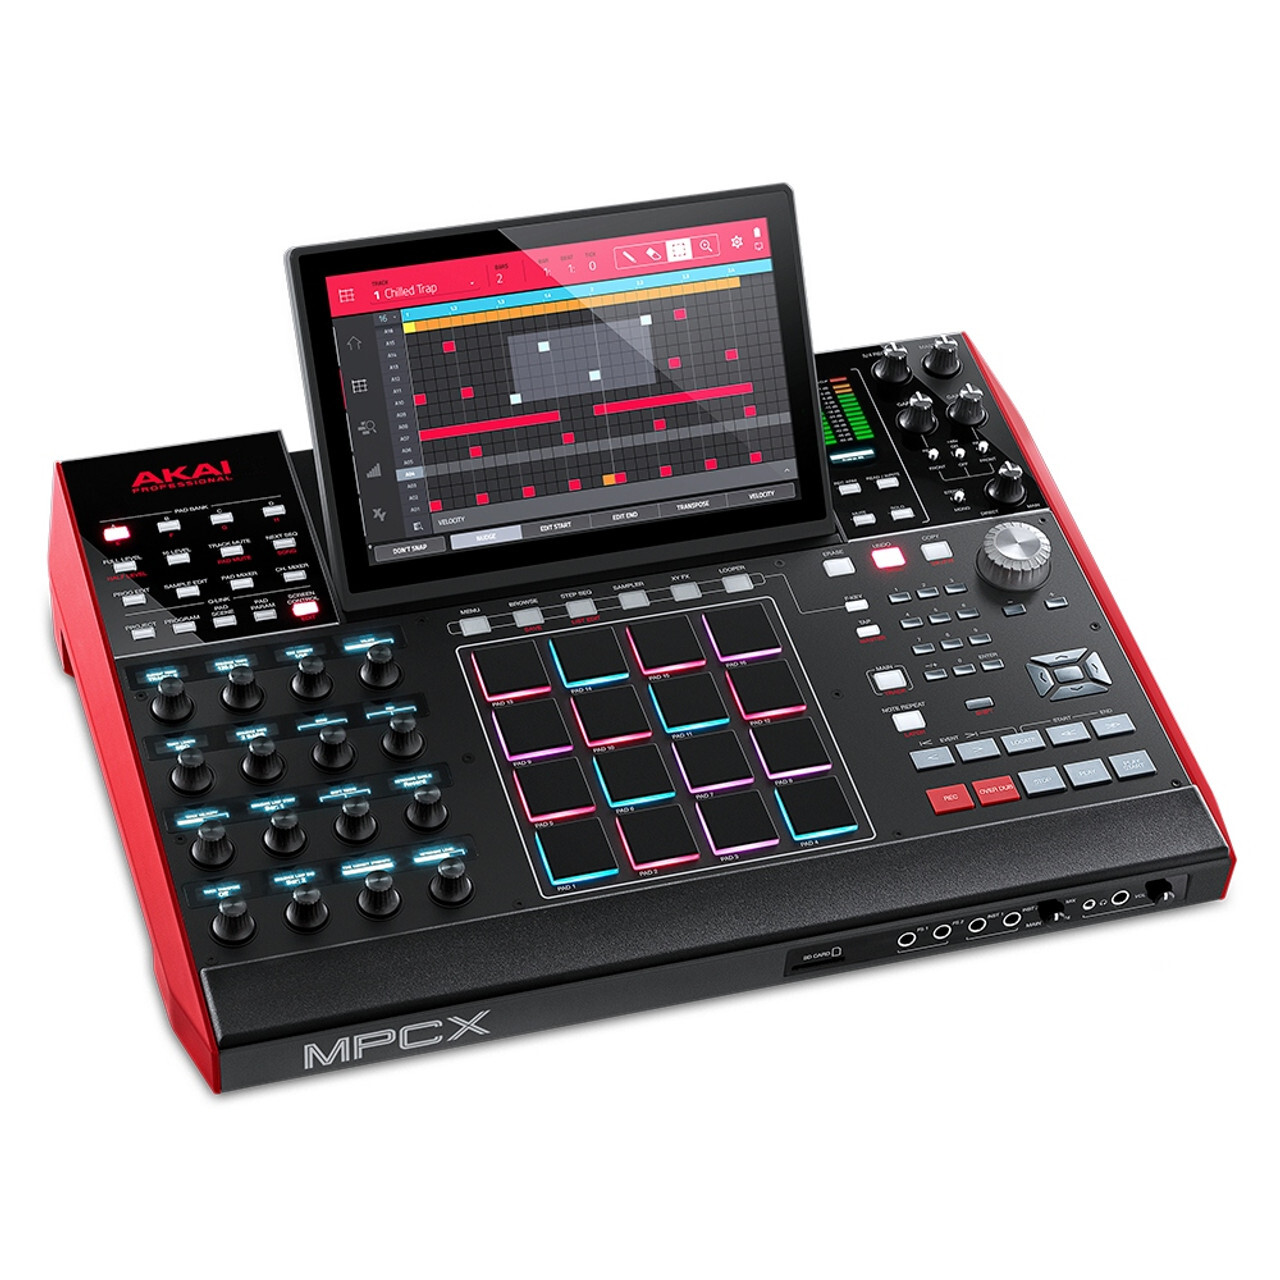 PROFESSIONAL MPC X Stand Alone Music Production Workstation